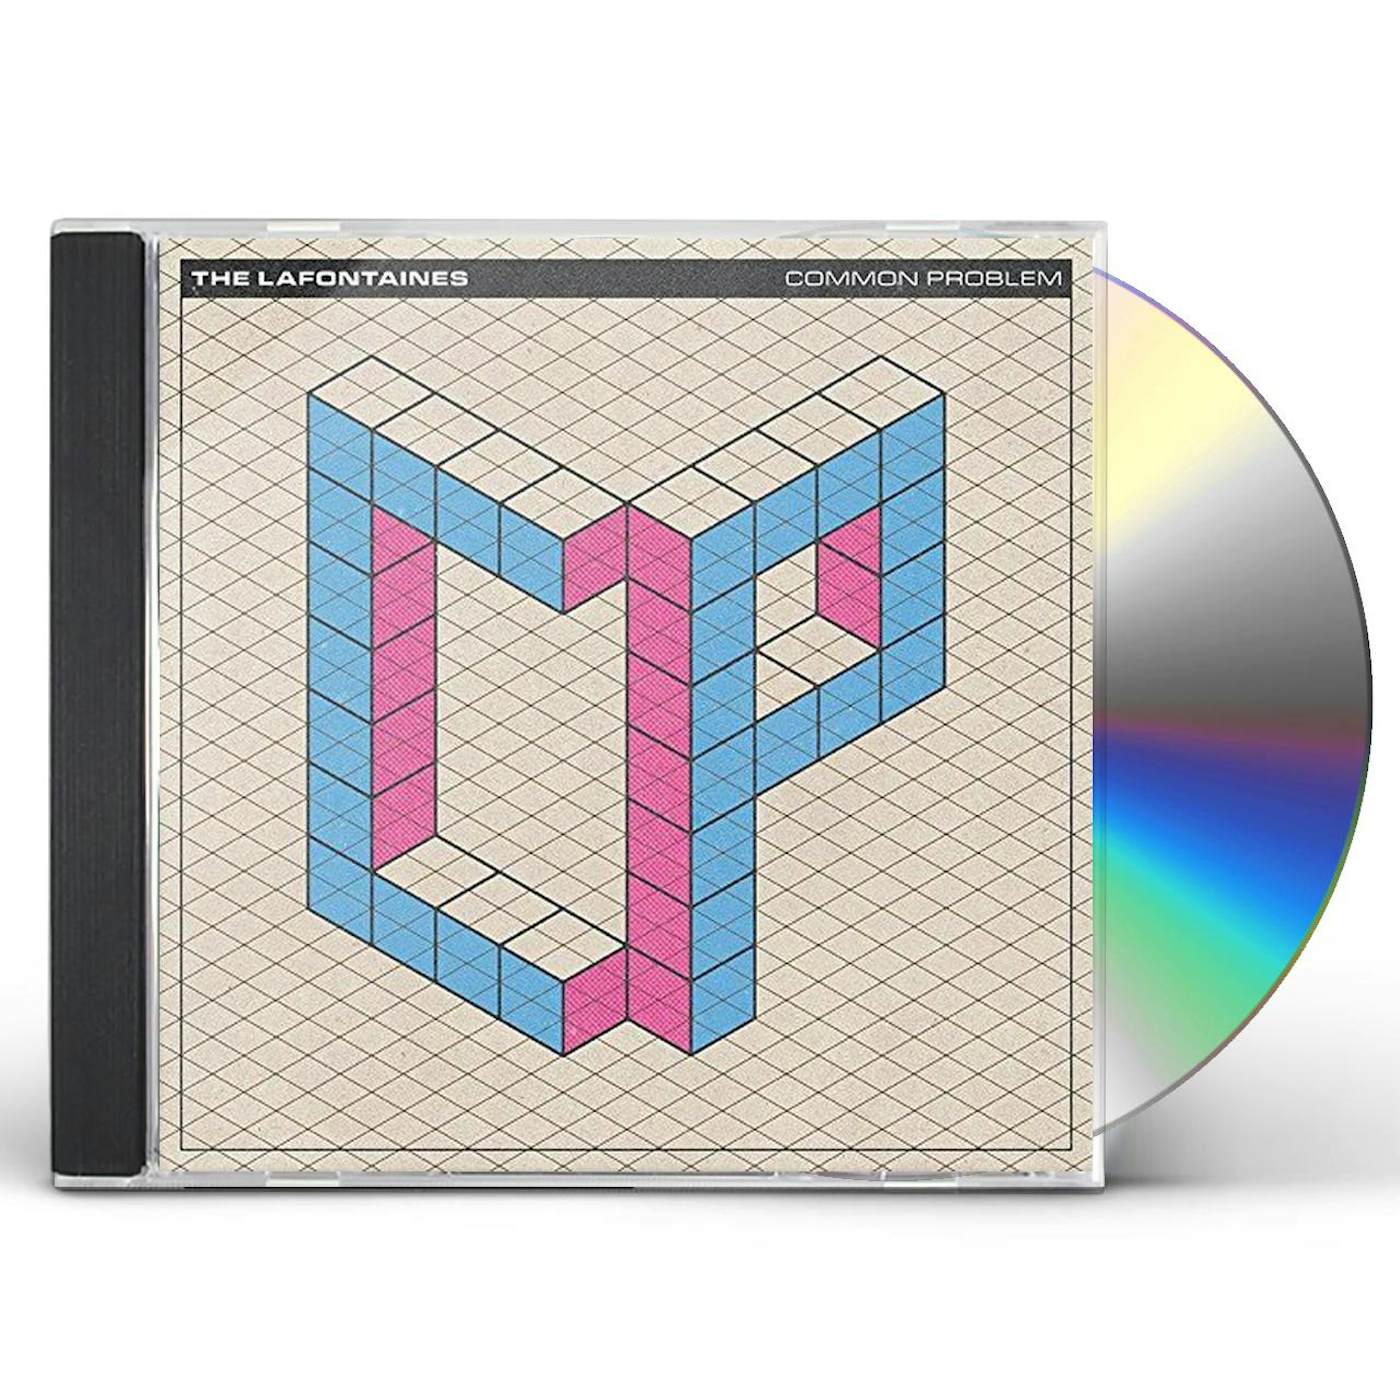 The LaFontaines COMMON PROBLEM CD